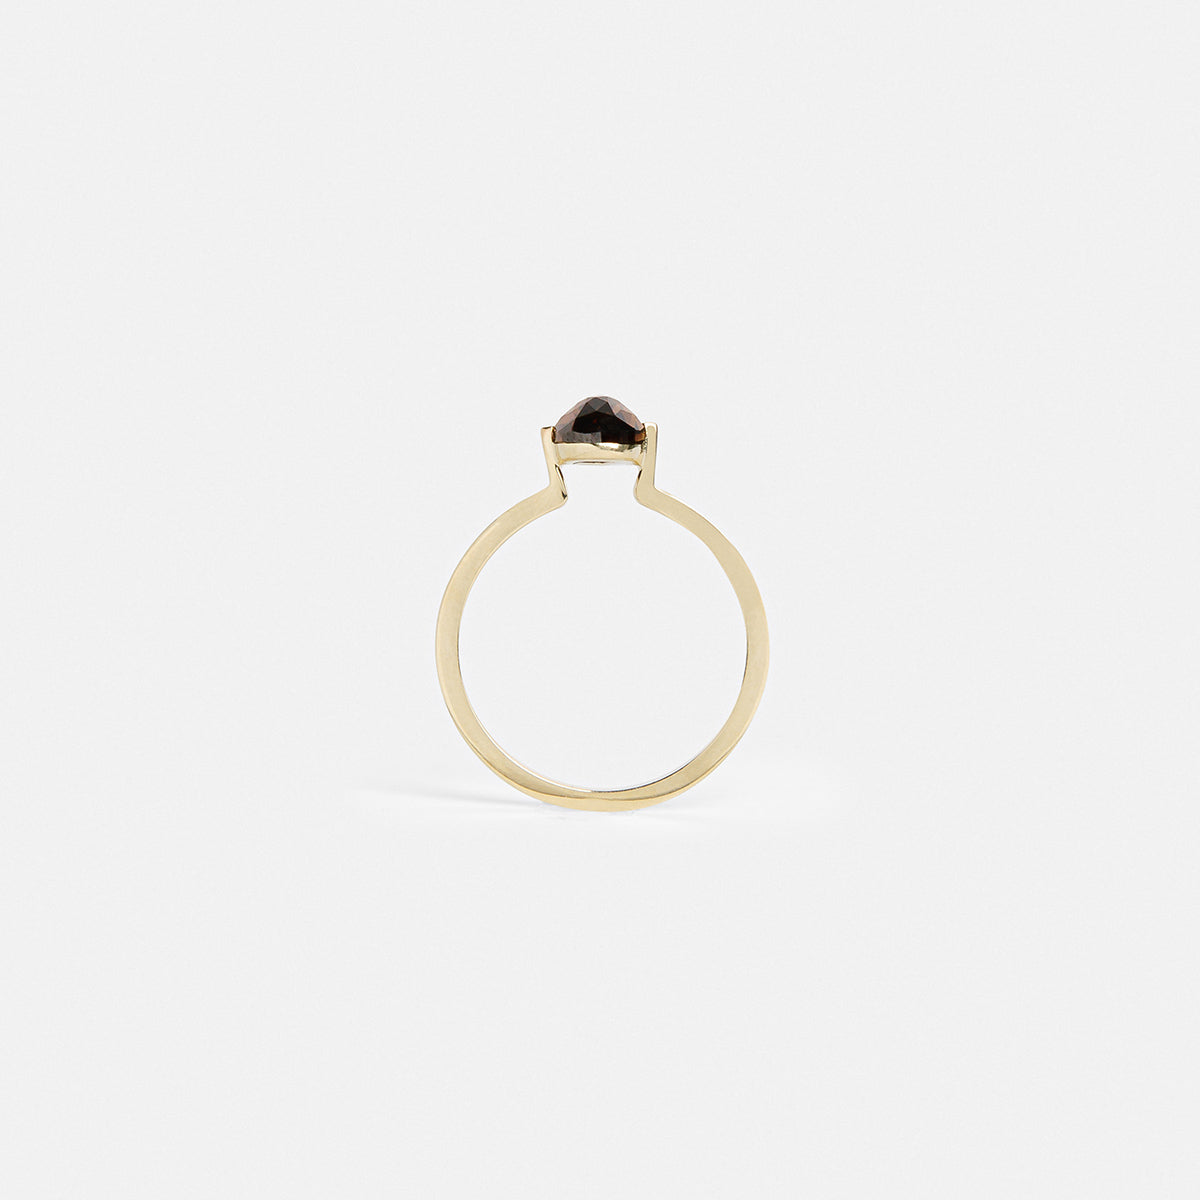 Gerda Unusual Ring in 14k Gold set with a 1.31ct pear-cut cognac natural diamond By SHW Fine Jewelry NYC